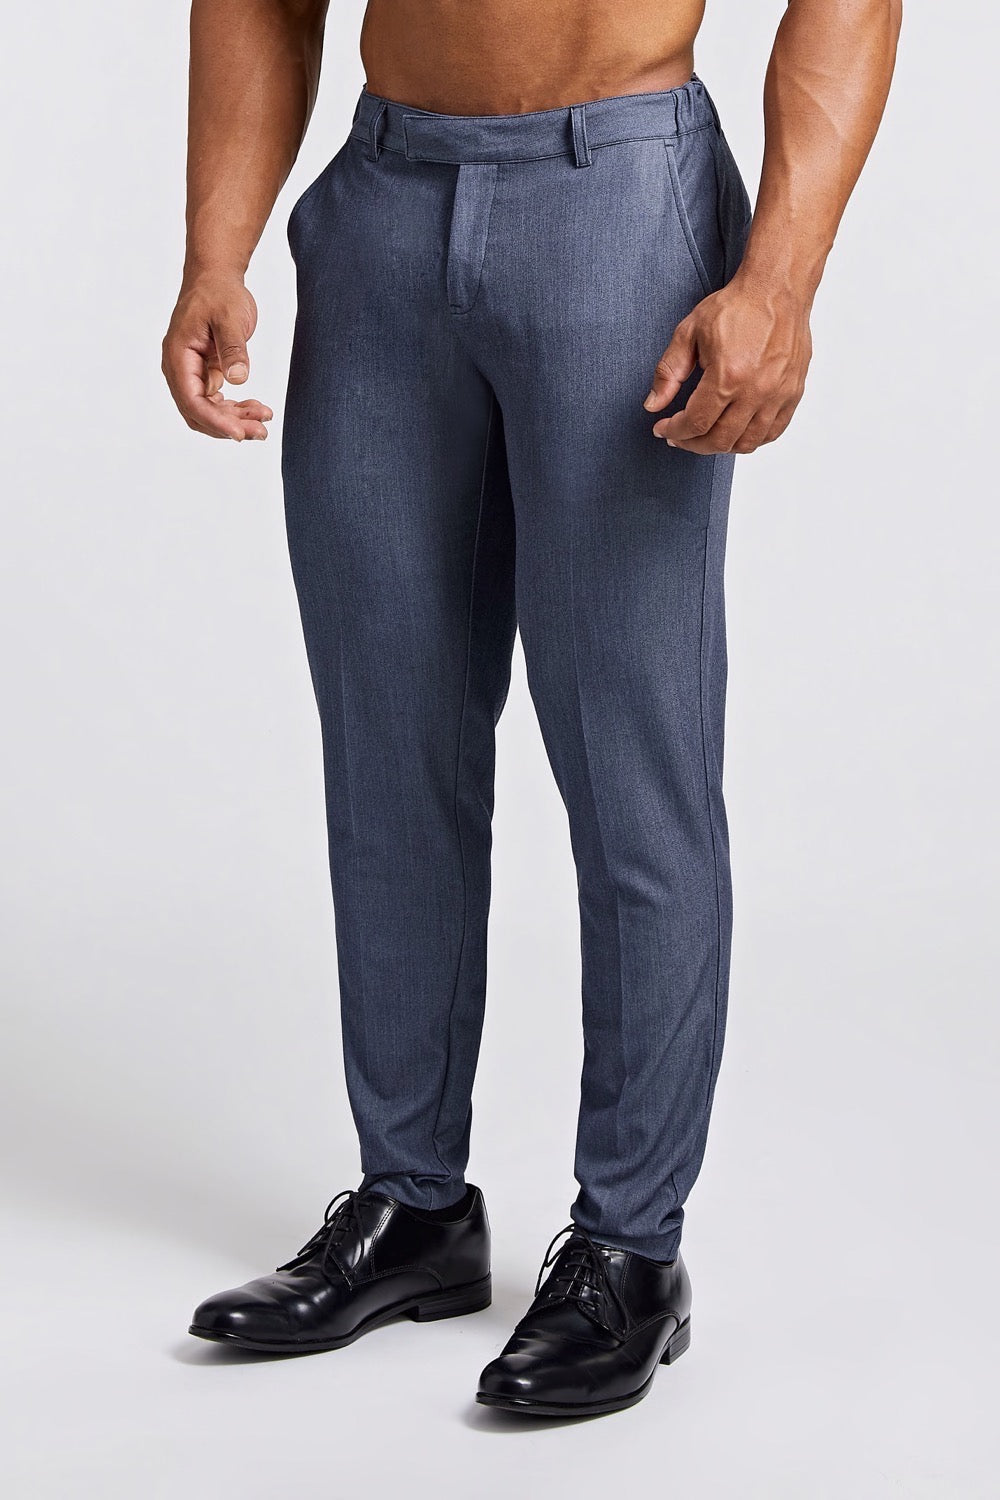 Muscle Fit Trousers in Chambray - TAILORED ATHLETE - ROW